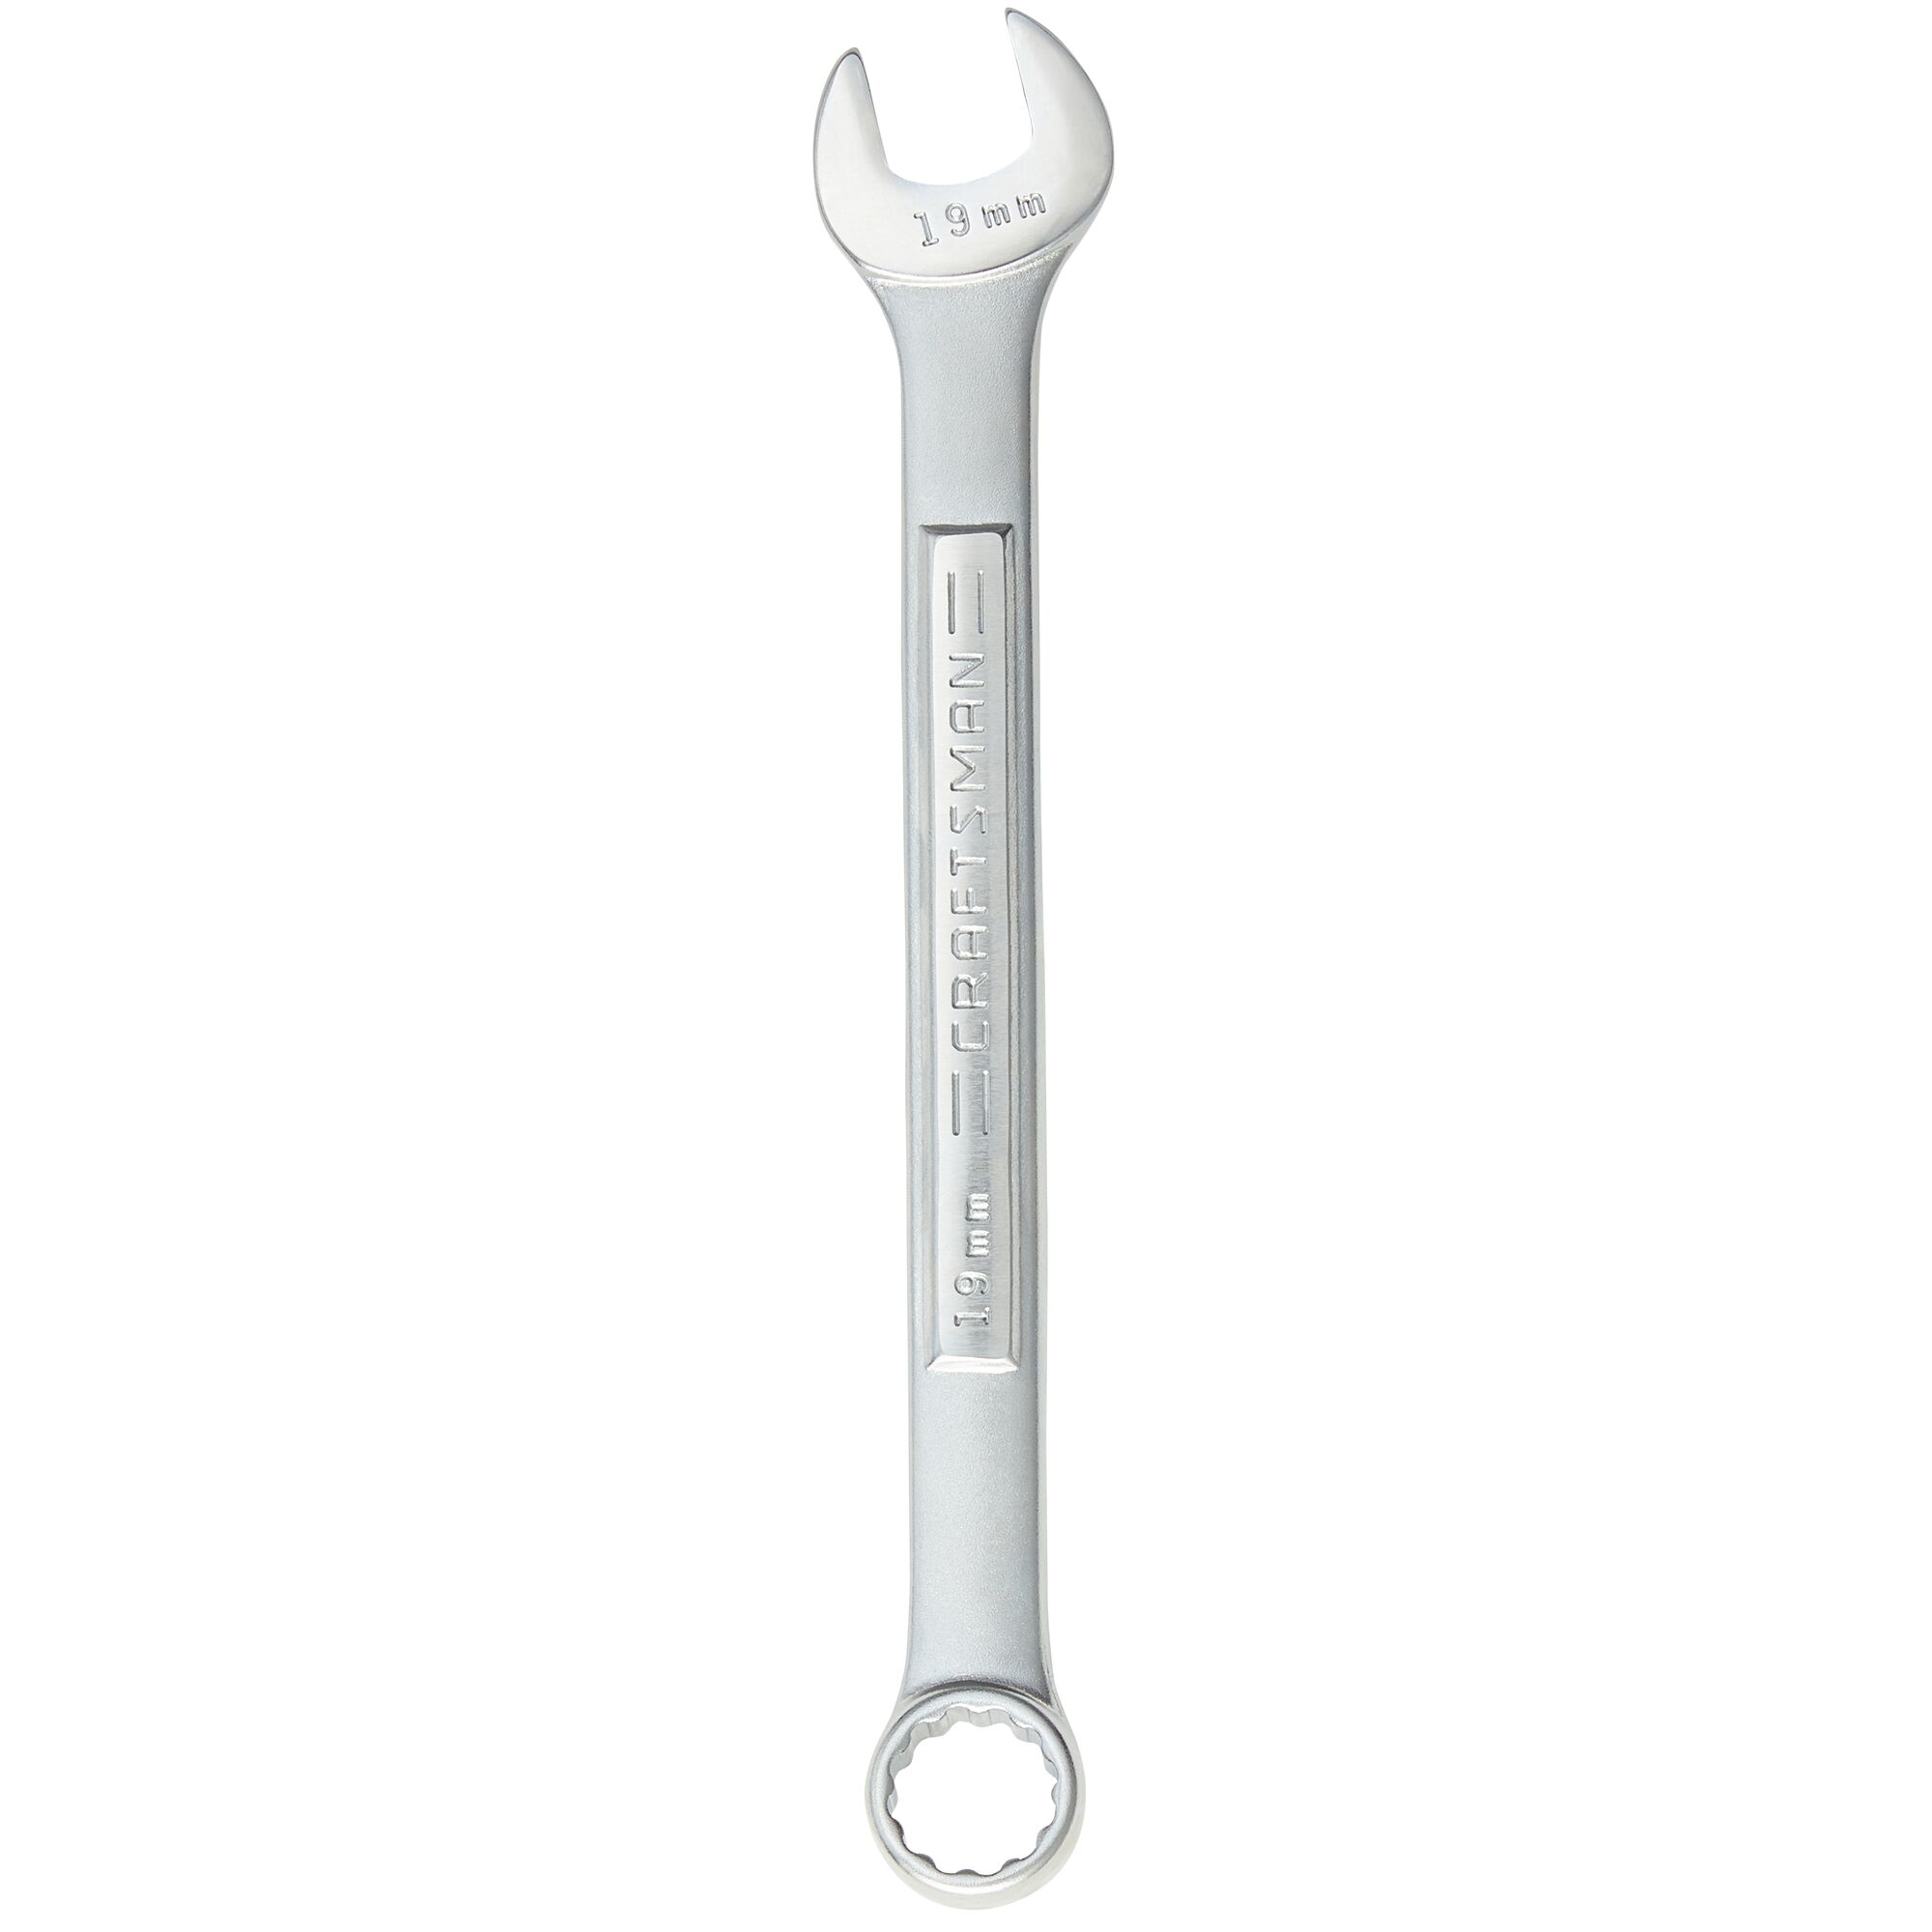 View of CRAFTSMAN Wrenches: Set on white background